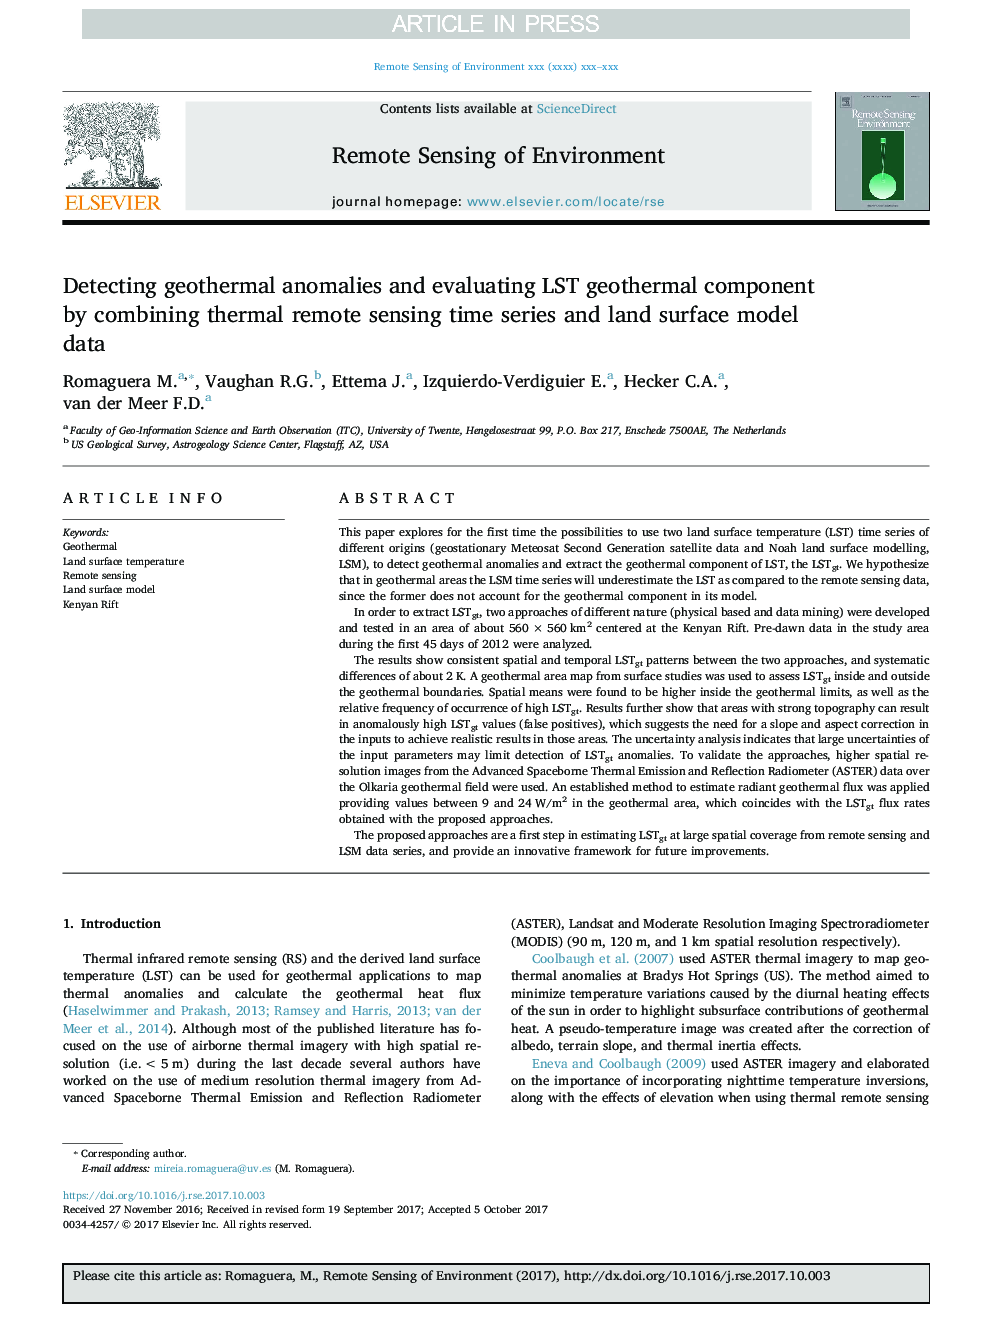 Detecting geothermal anomalies and evaluating LST geothermal component by combining thermal remote sensing time series and land surface model data